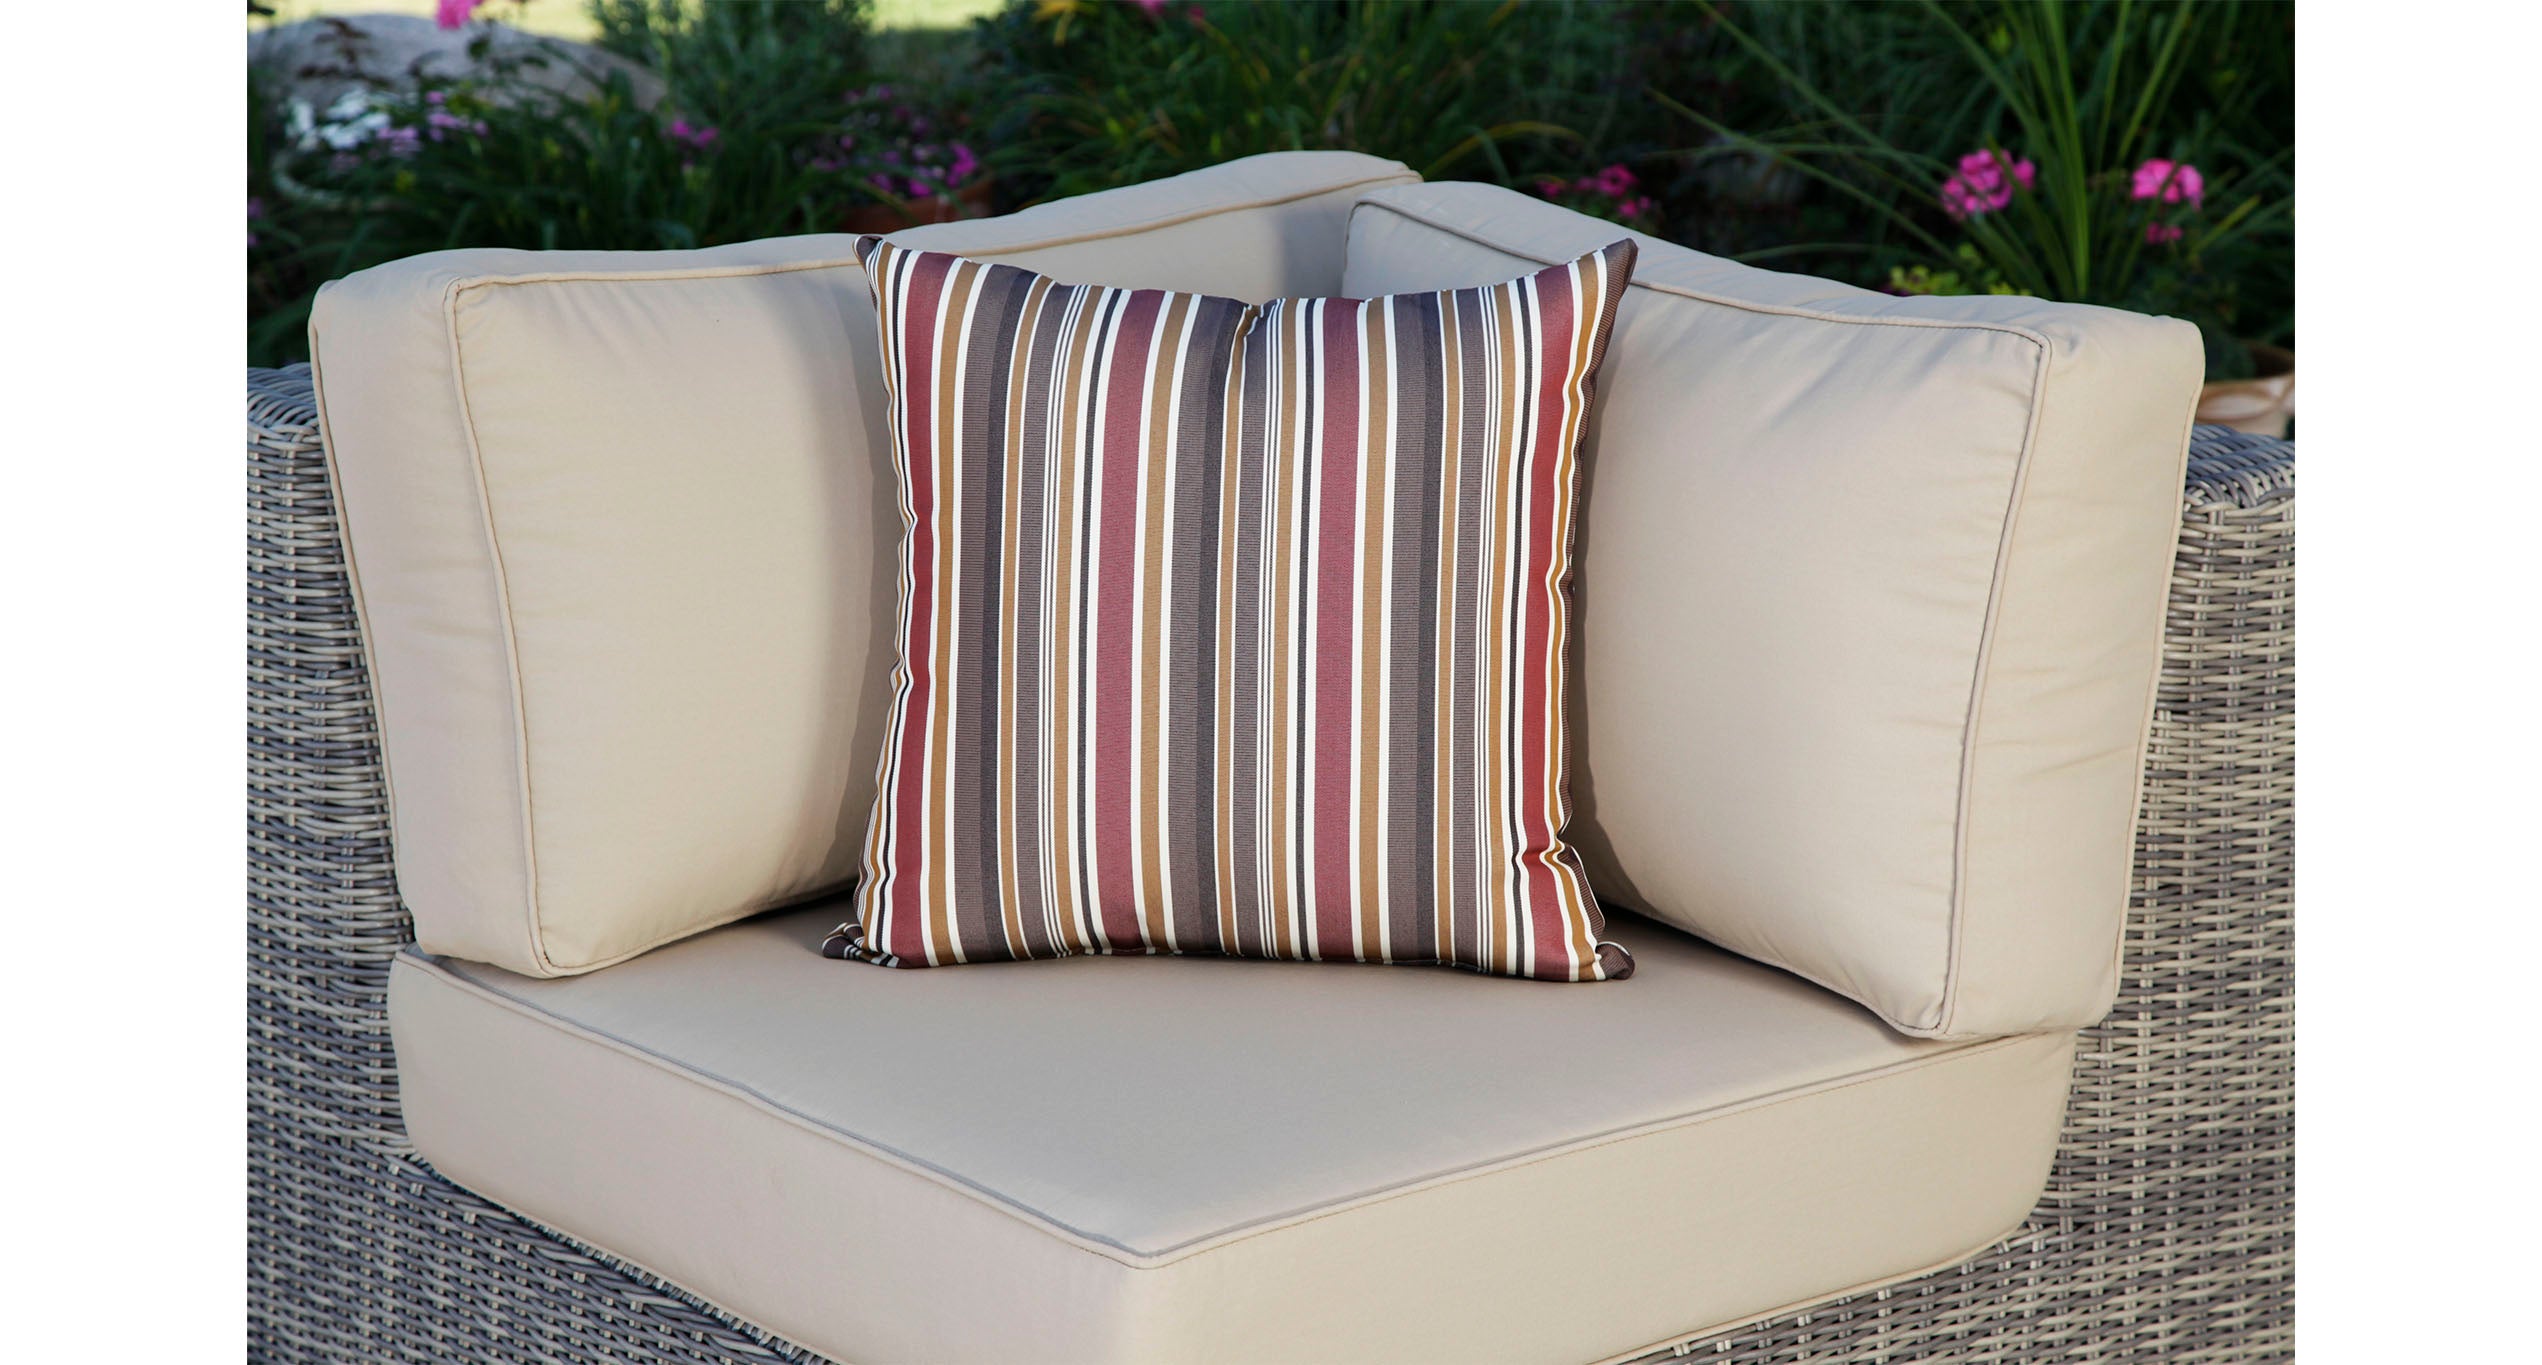 Outdoor throw pillow red striped